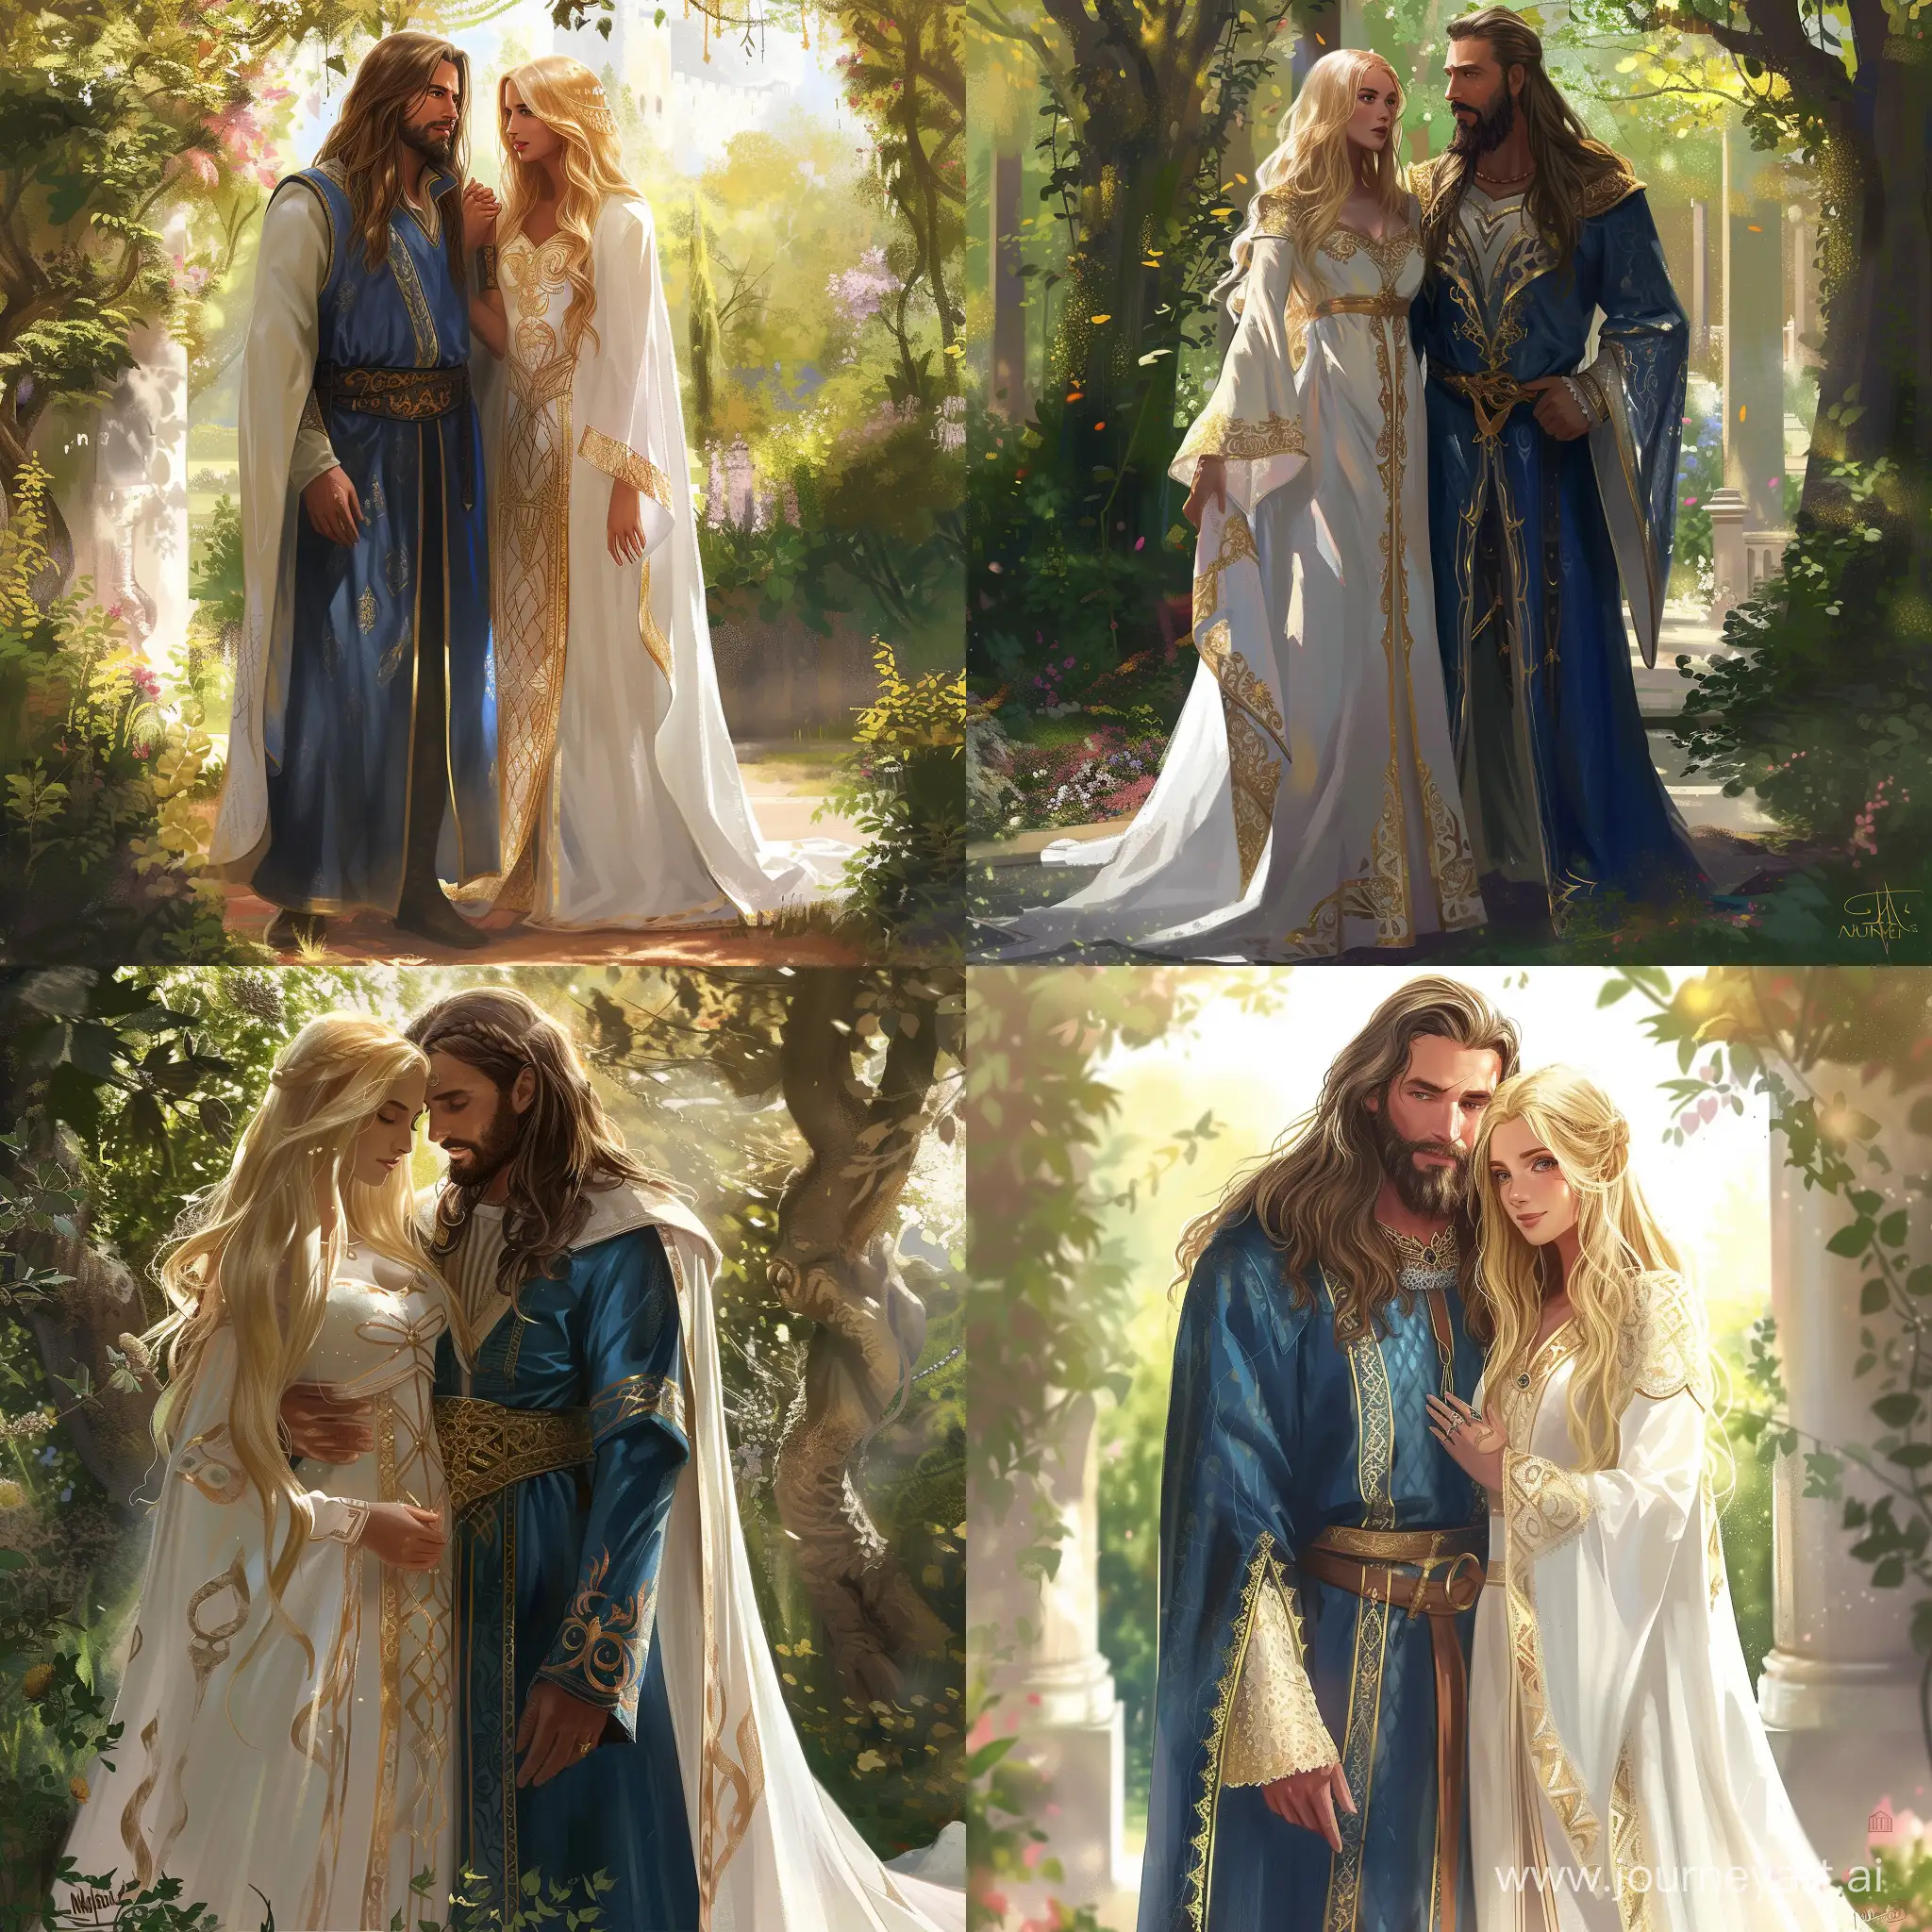 Draw art with a couple in love: a man with long brown hair and beard in a Numenor blue robe and a blonde beautiful girl in a white long robe with golden patterns, they are standing alone in the royal garden. All this is in the style of the game Crusader kings 3